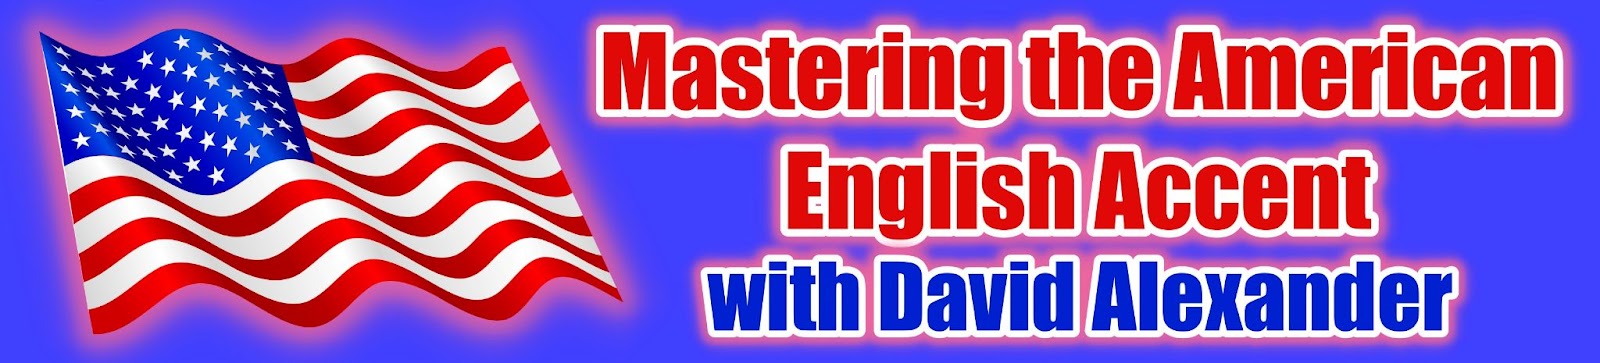 Mastering American English Accent Course